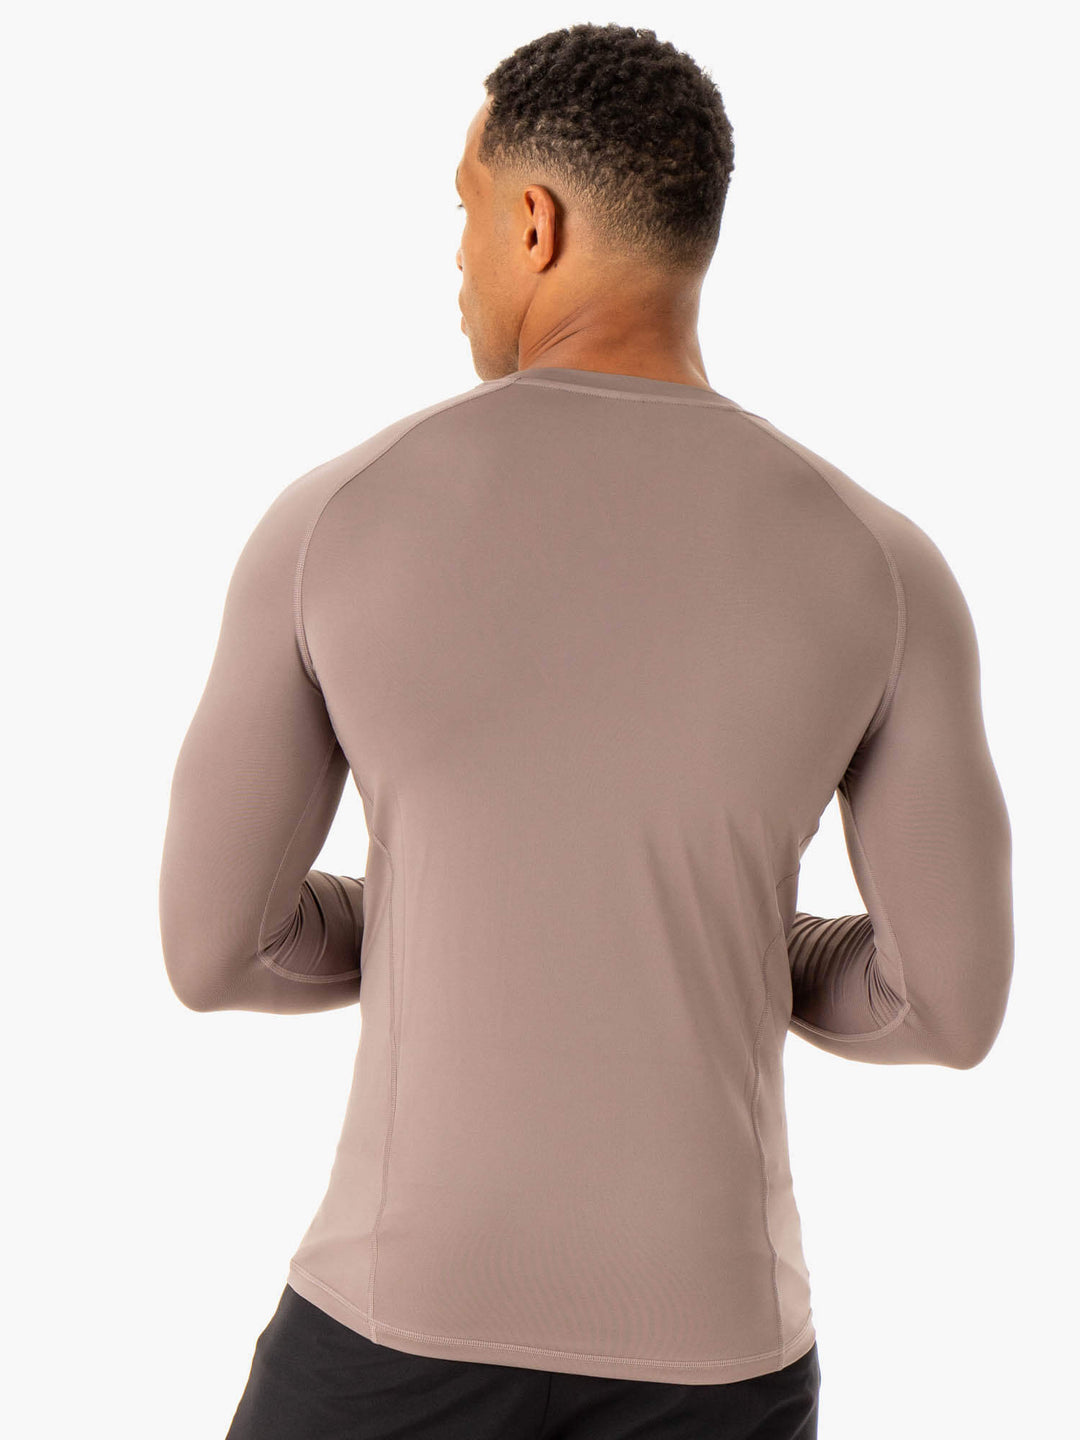 Division Base Layer Long Sleeve - Taupe Clothing Ryderwear 